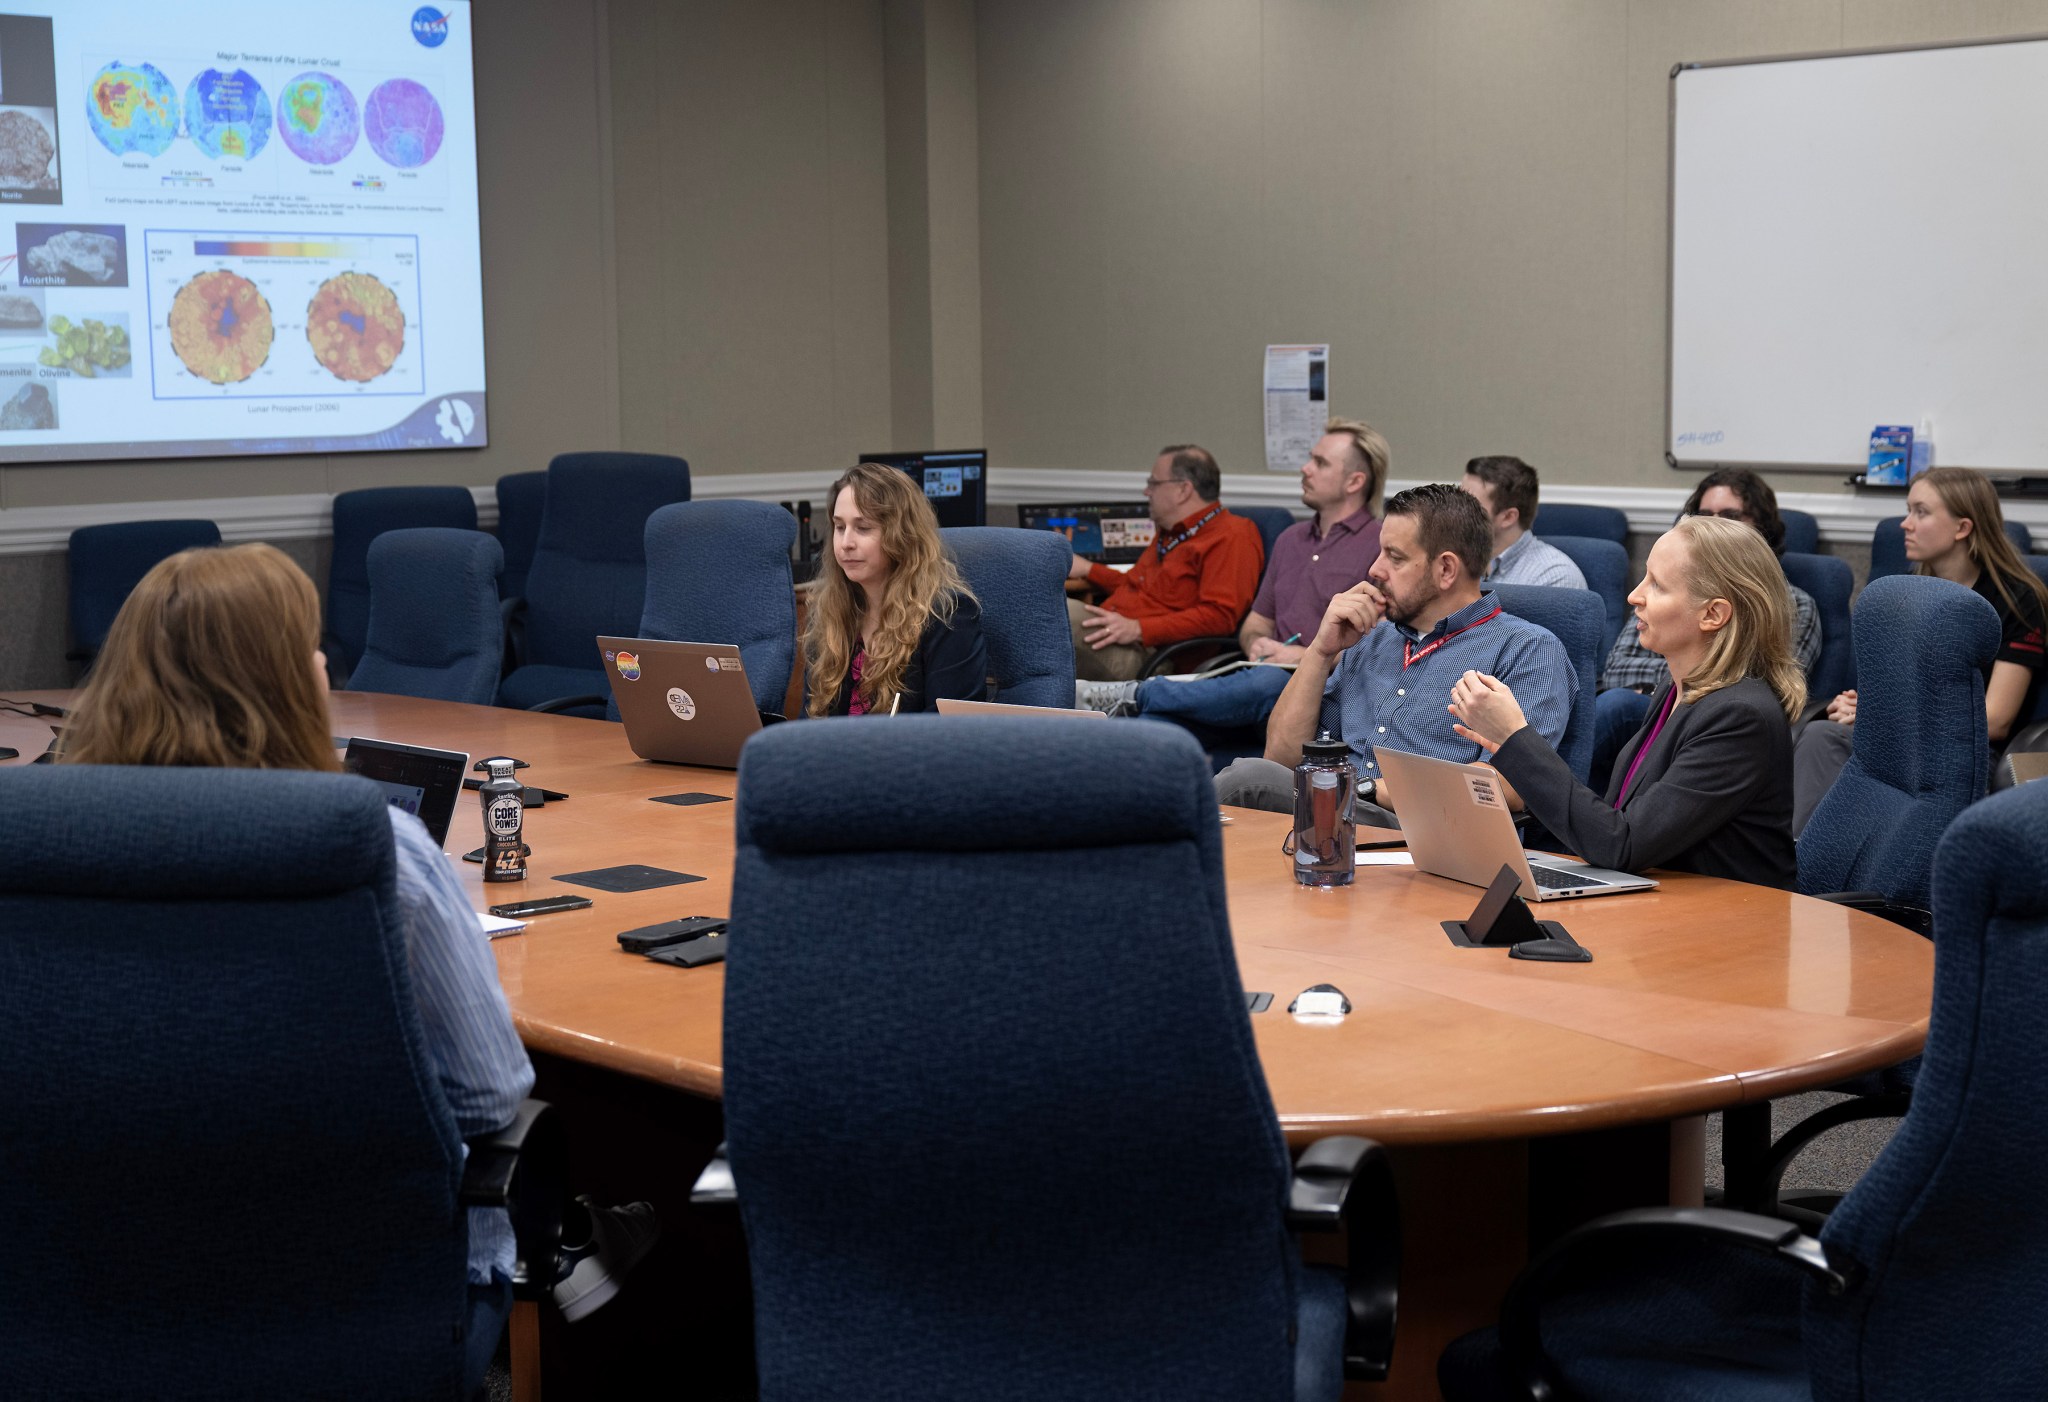 Geologist Jennifer Edmunson, from right, discusses lunar regolith and infrastructure plans during a brown bag seminar Nov. 7 at NASA’s Marshall Space Flight Center that highlighted the center’s Moon/Mars Surface Technologies and Systems business unit.